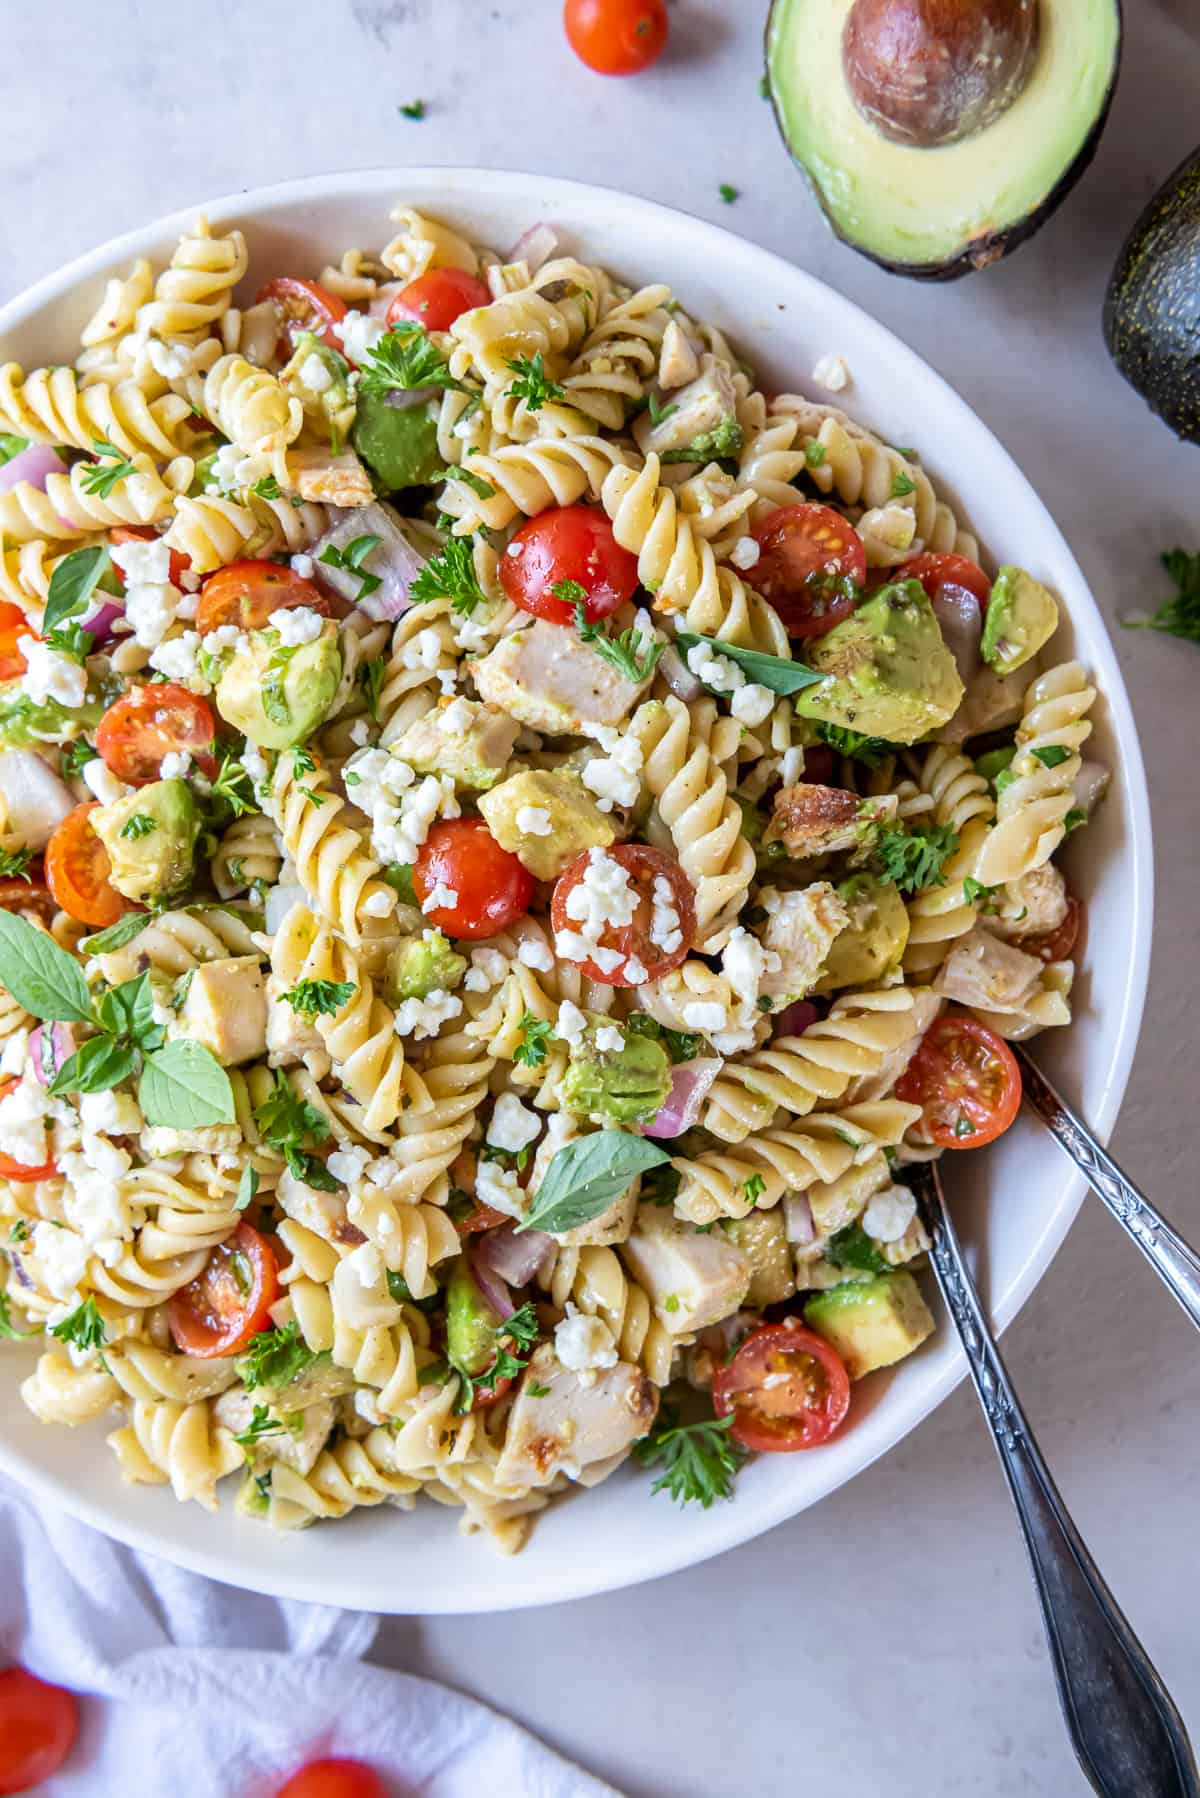 Pasta salad with avocado, chicken, and tomatoes in a white bowl with spoons.